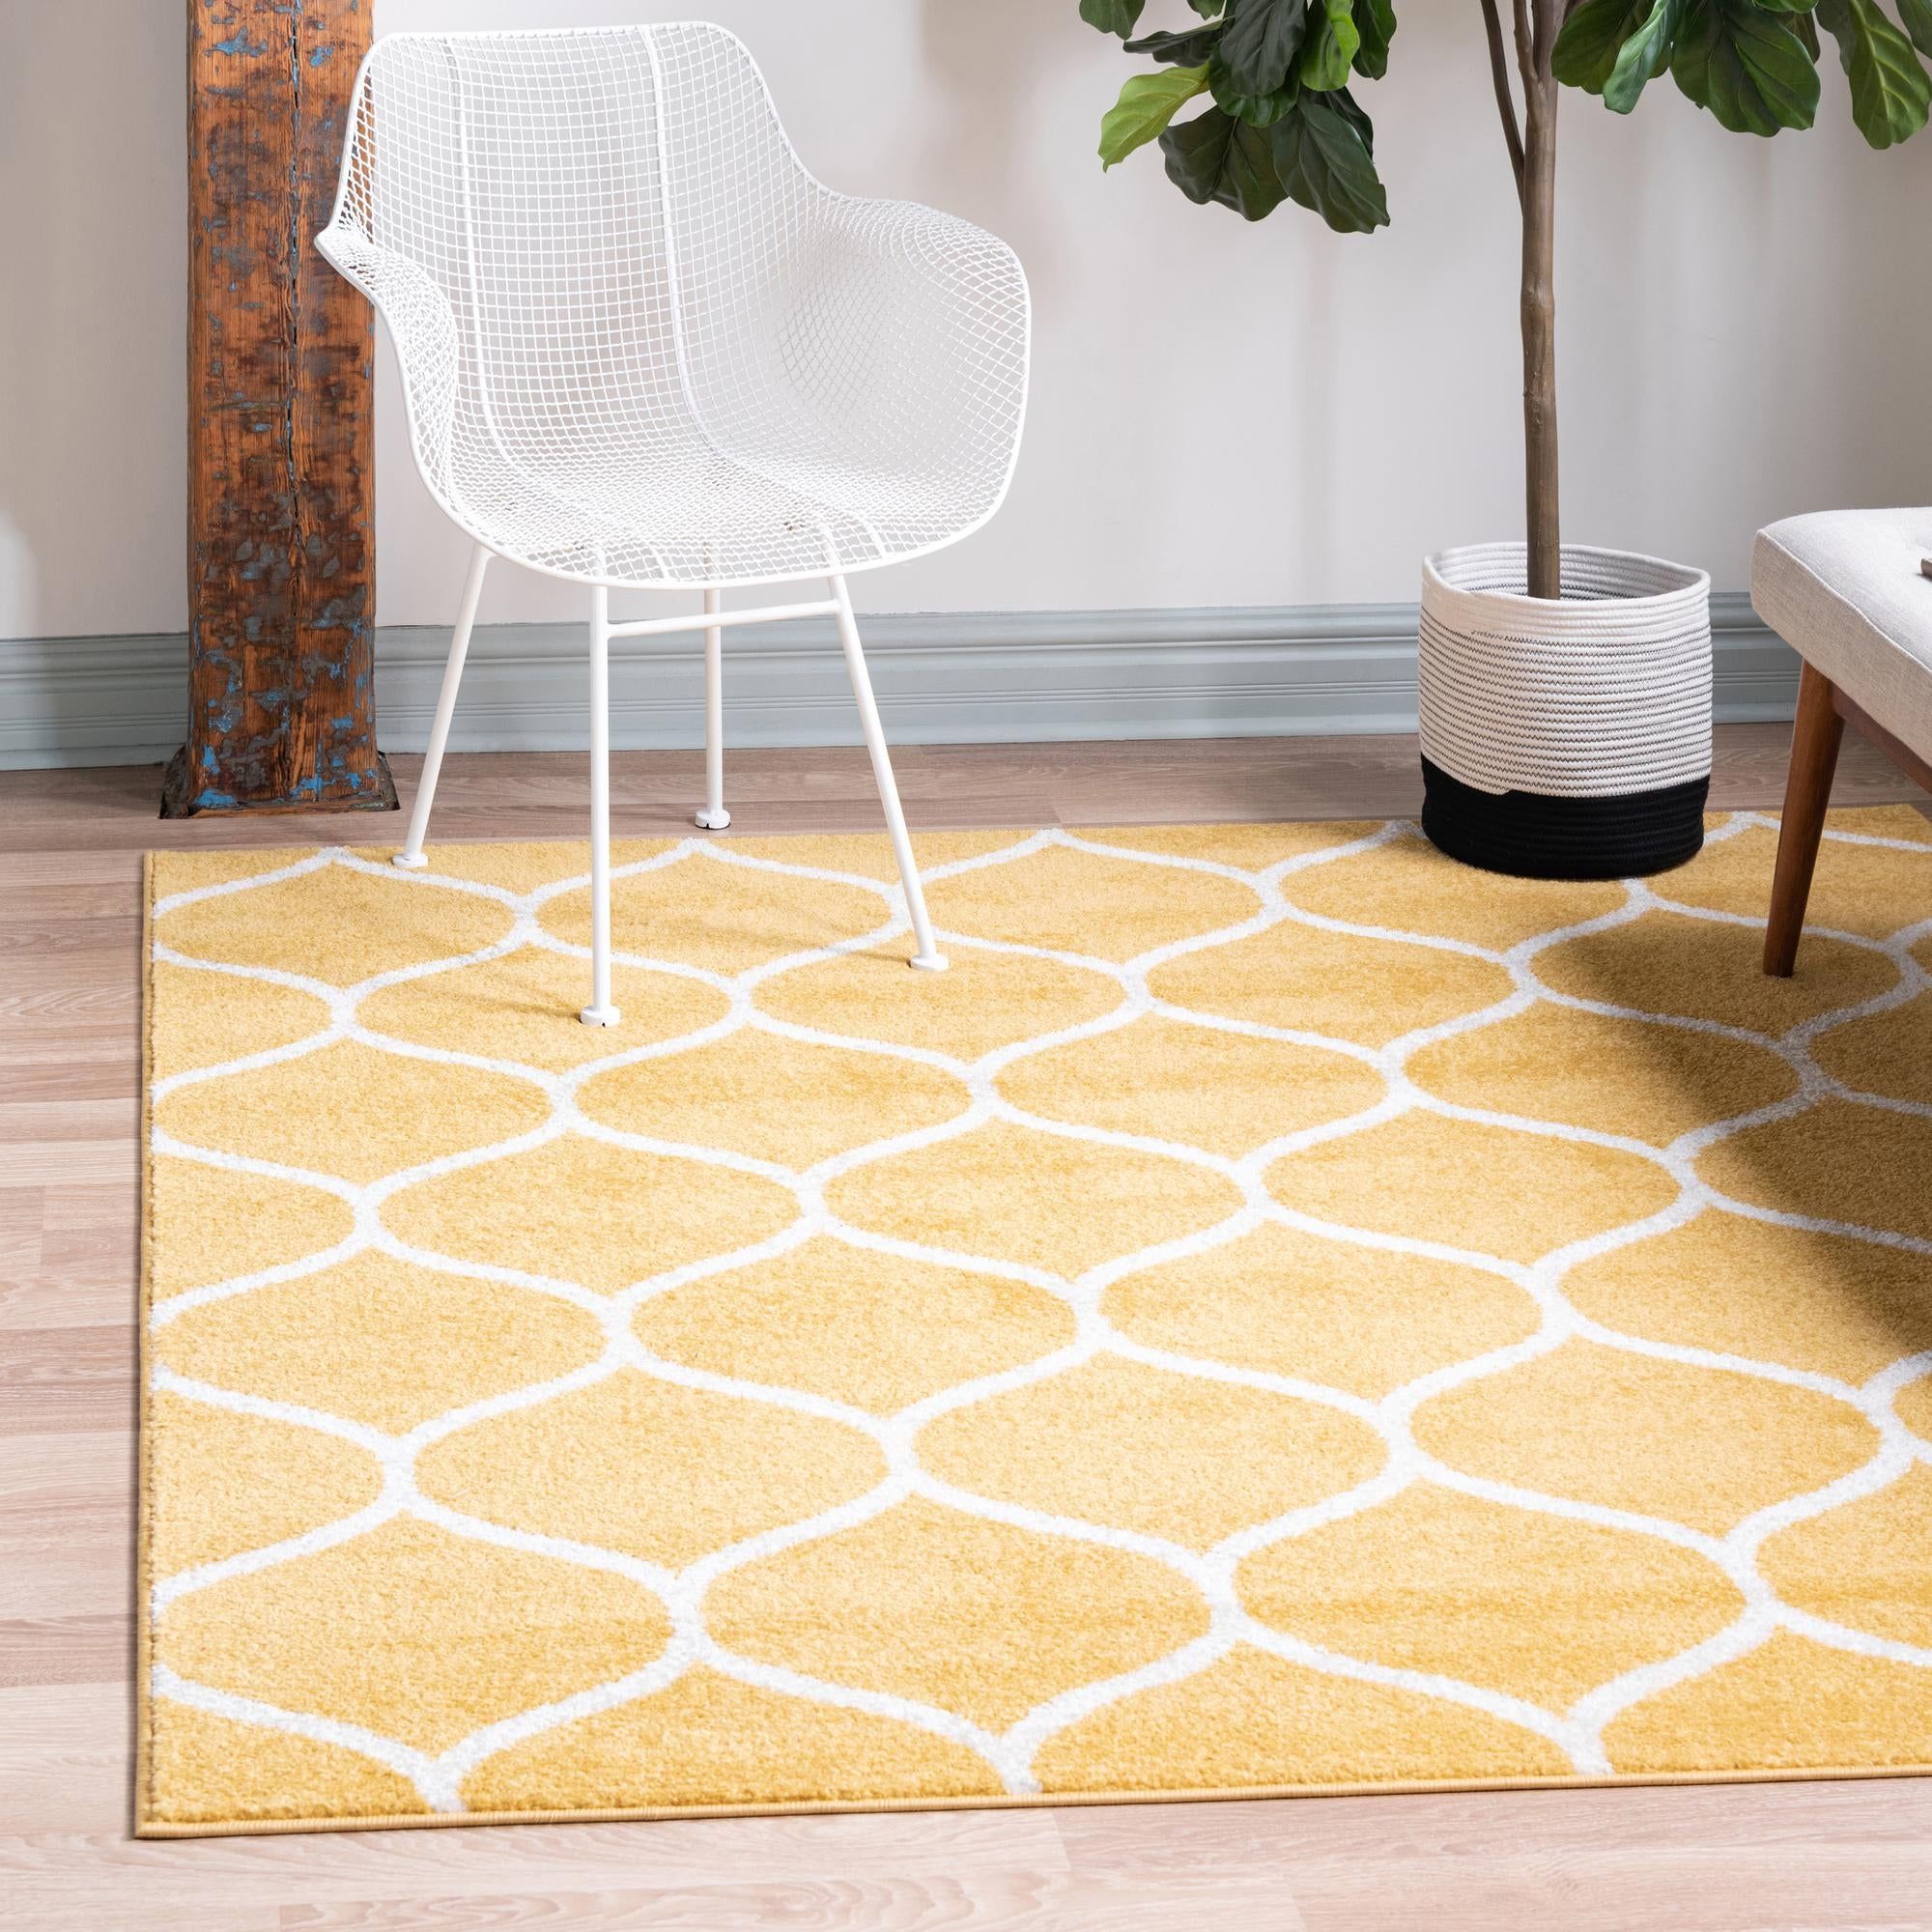 Yellow 240Cm X 240Cm Trellis Frieze Square Rug | Irugs Ch Pertaining To Frieze Square Rugs (View 4 of 15)